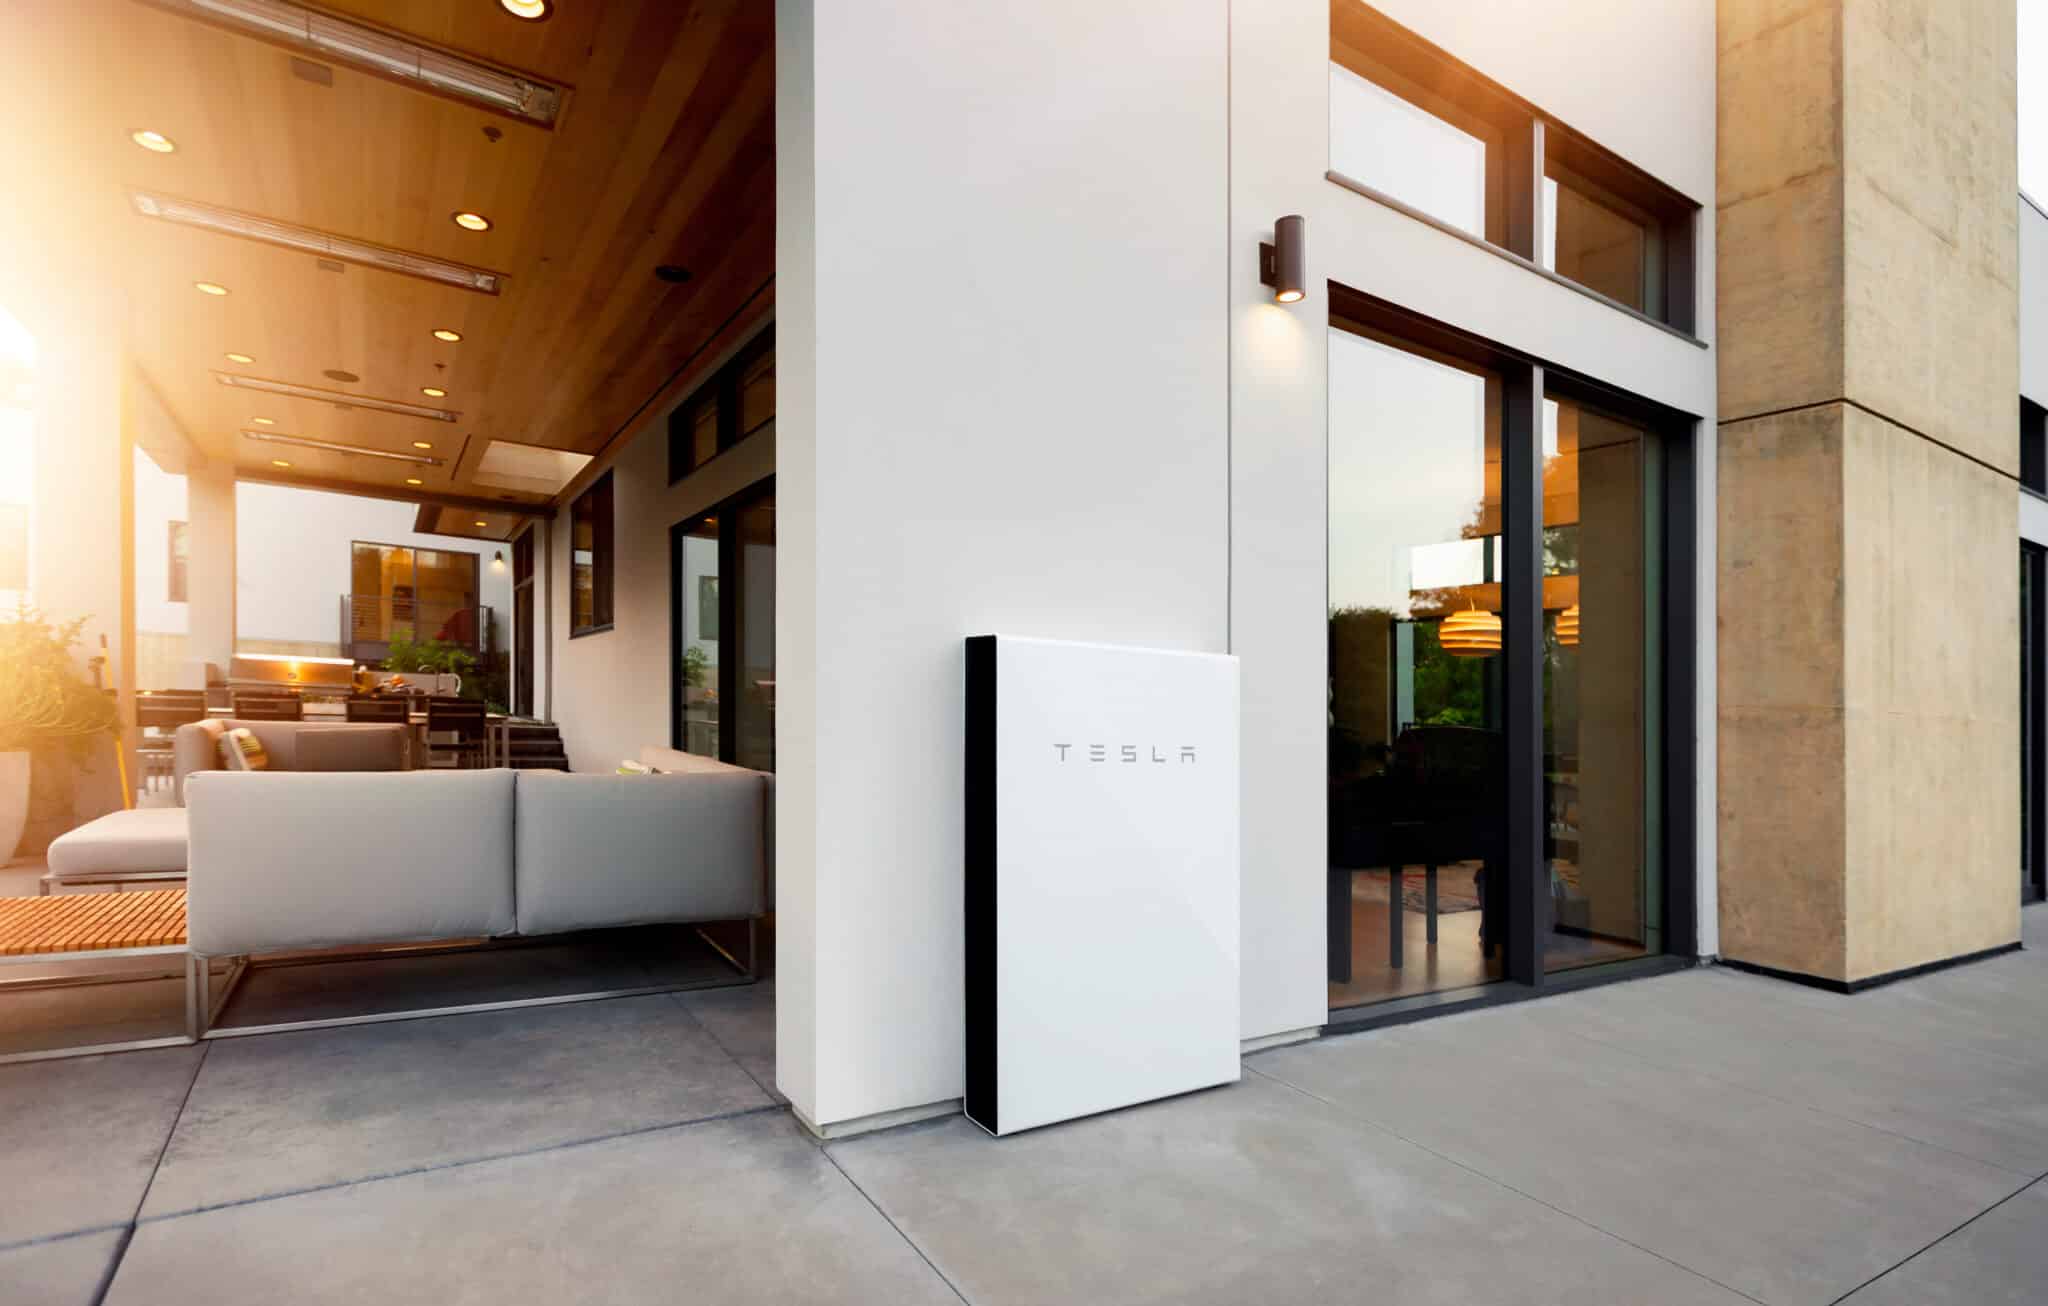 Tesla powerwall battery against outer wall of house